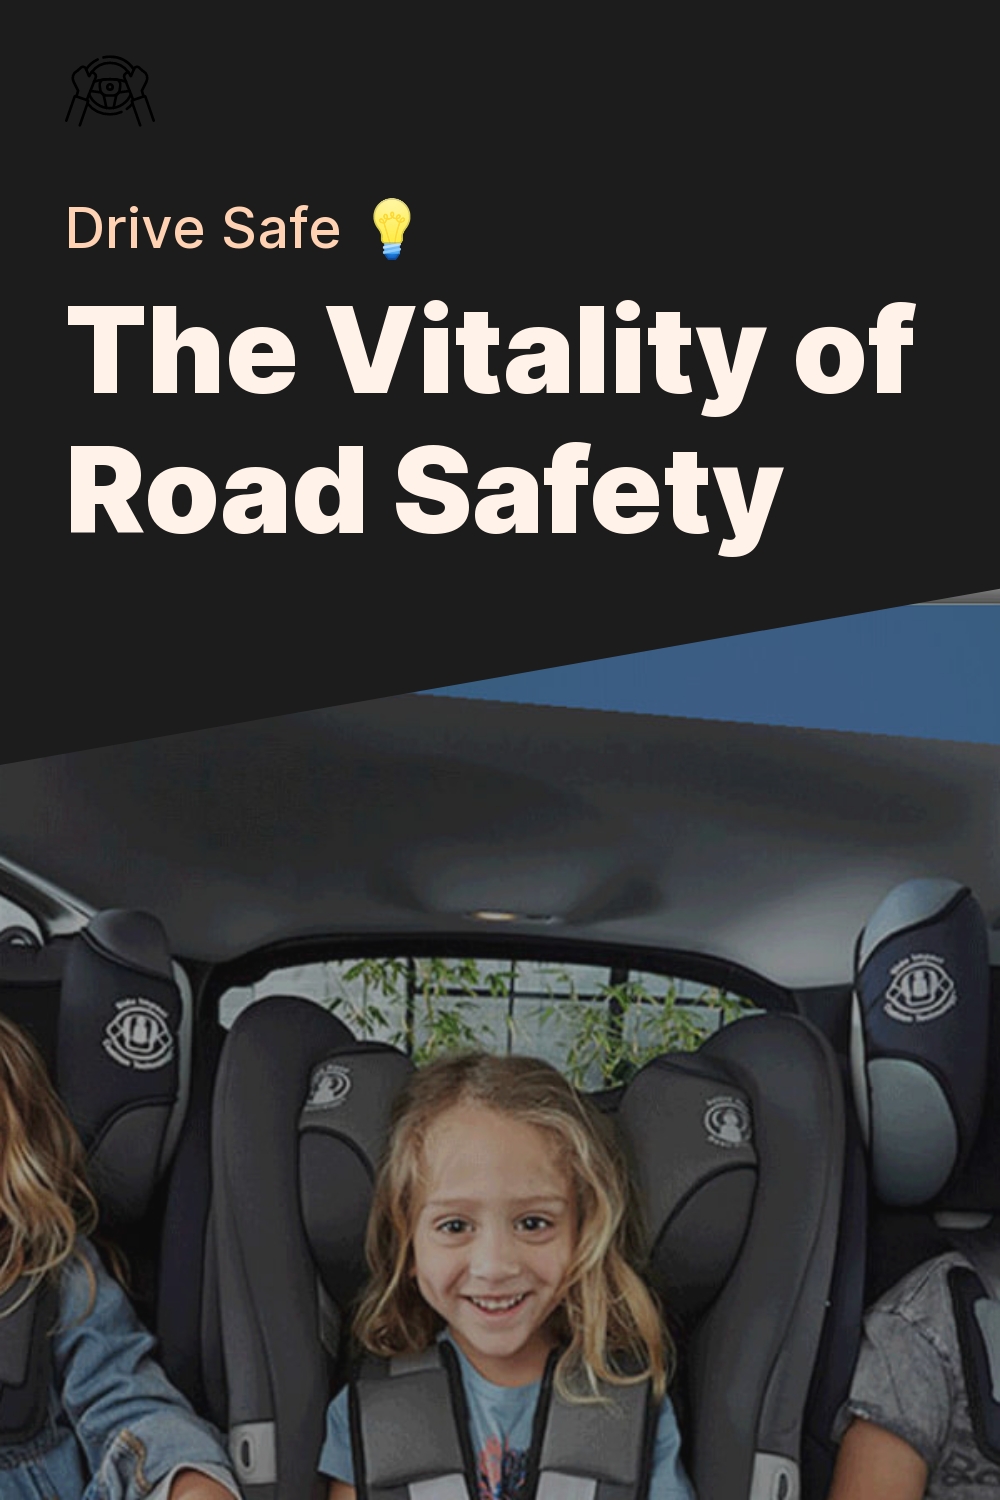 The Vitality of Road Safety - Drive Safe 💡